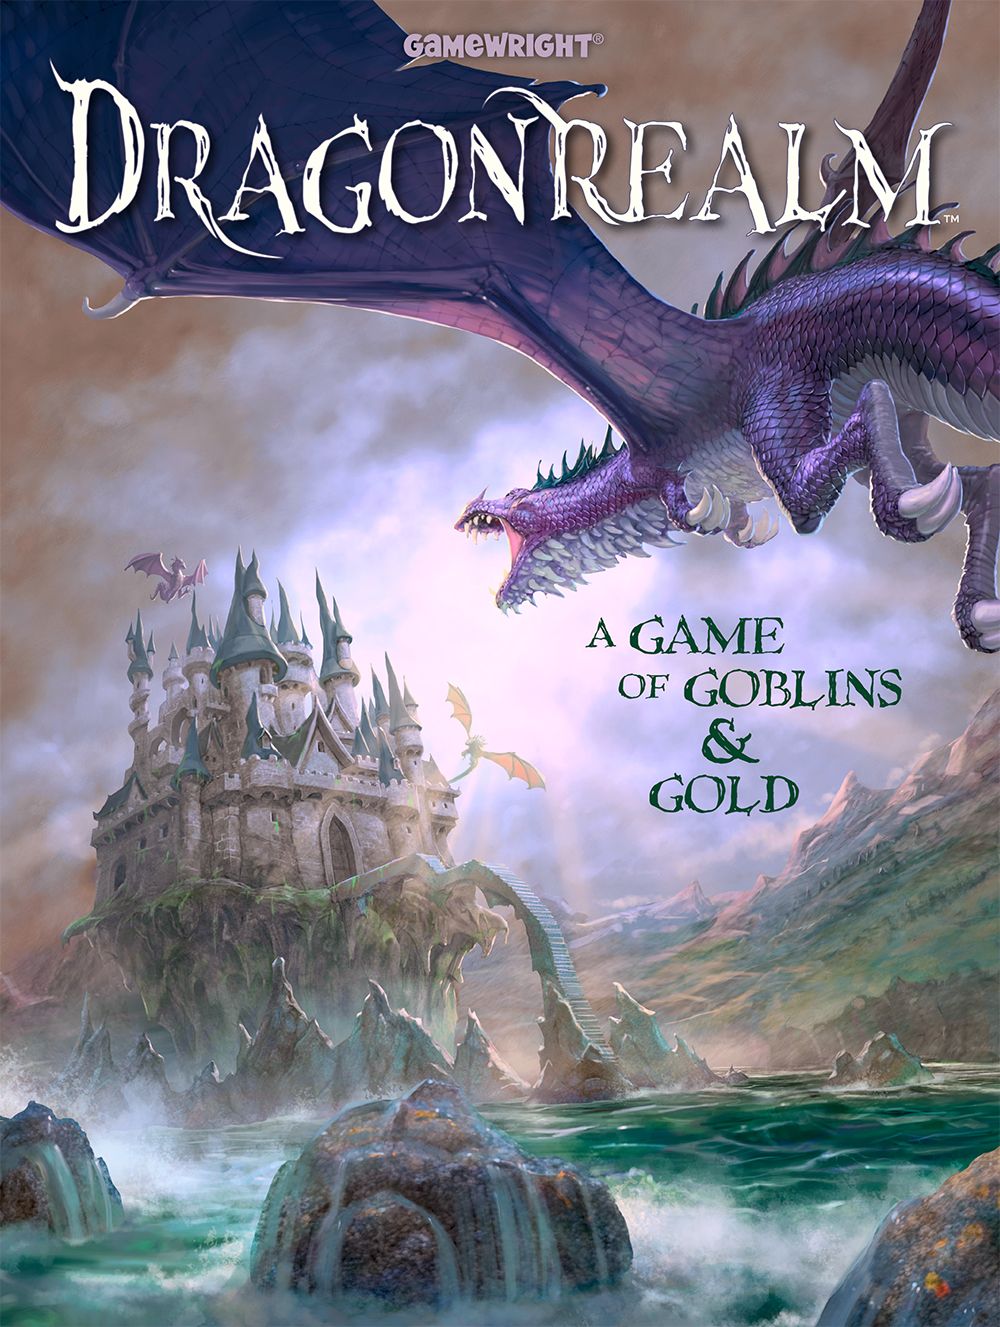 Dragonrealm - A Game of Goblins and Gold